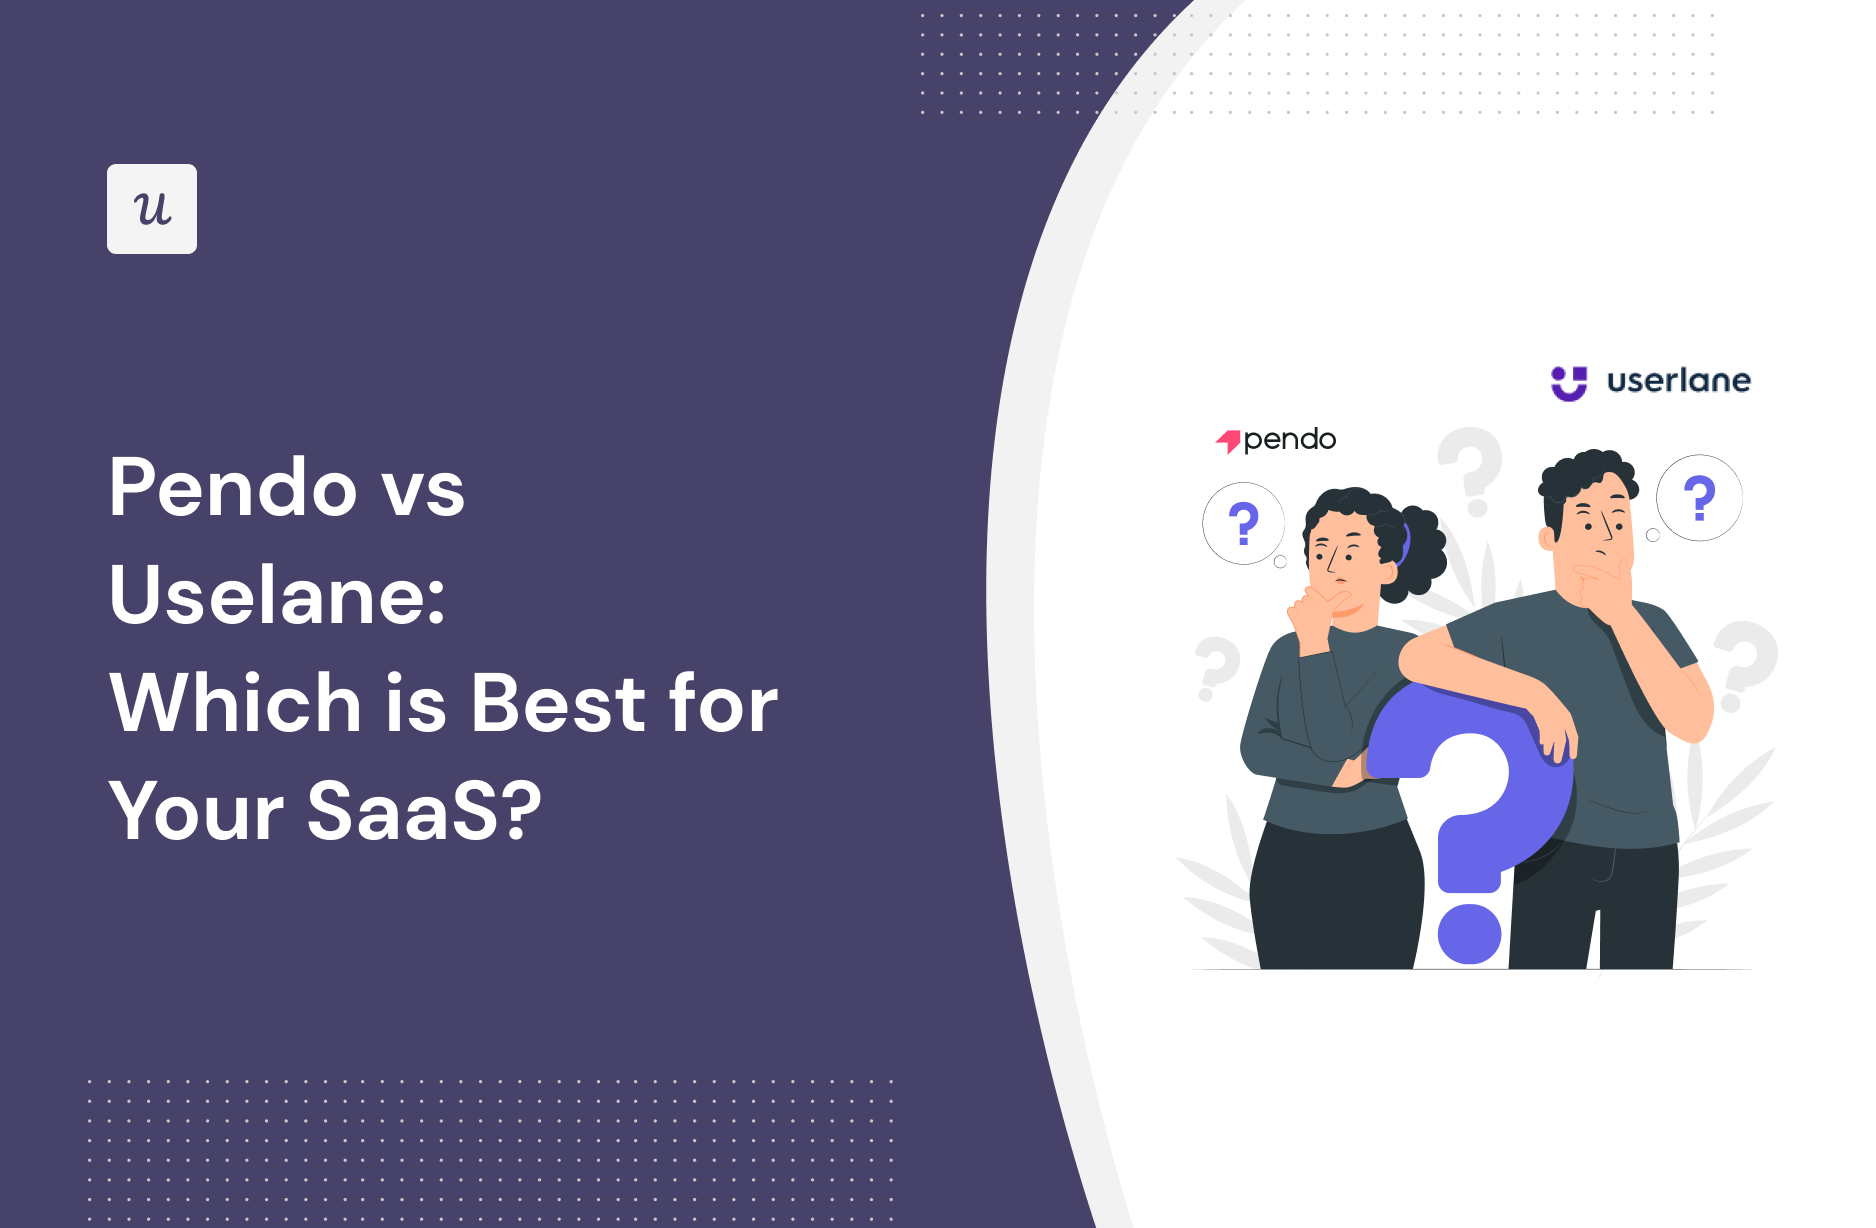 Pendo vs Uselane: Which is Best for Your SaaS?